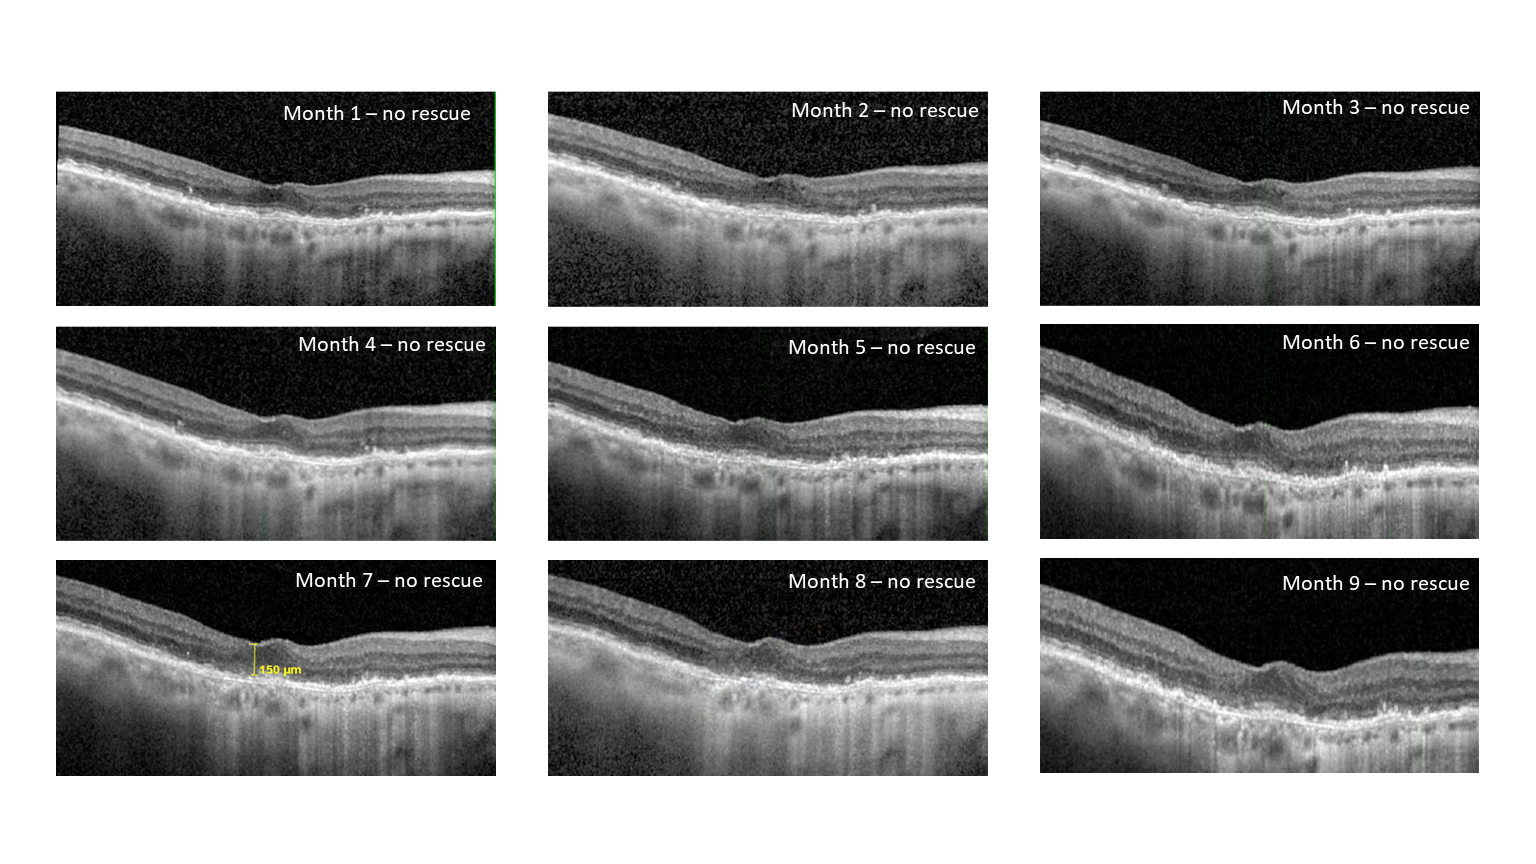 Patient 1: Post-treatment OCT’s showing no fluid reaccumulation after a single injection of EYP-1901